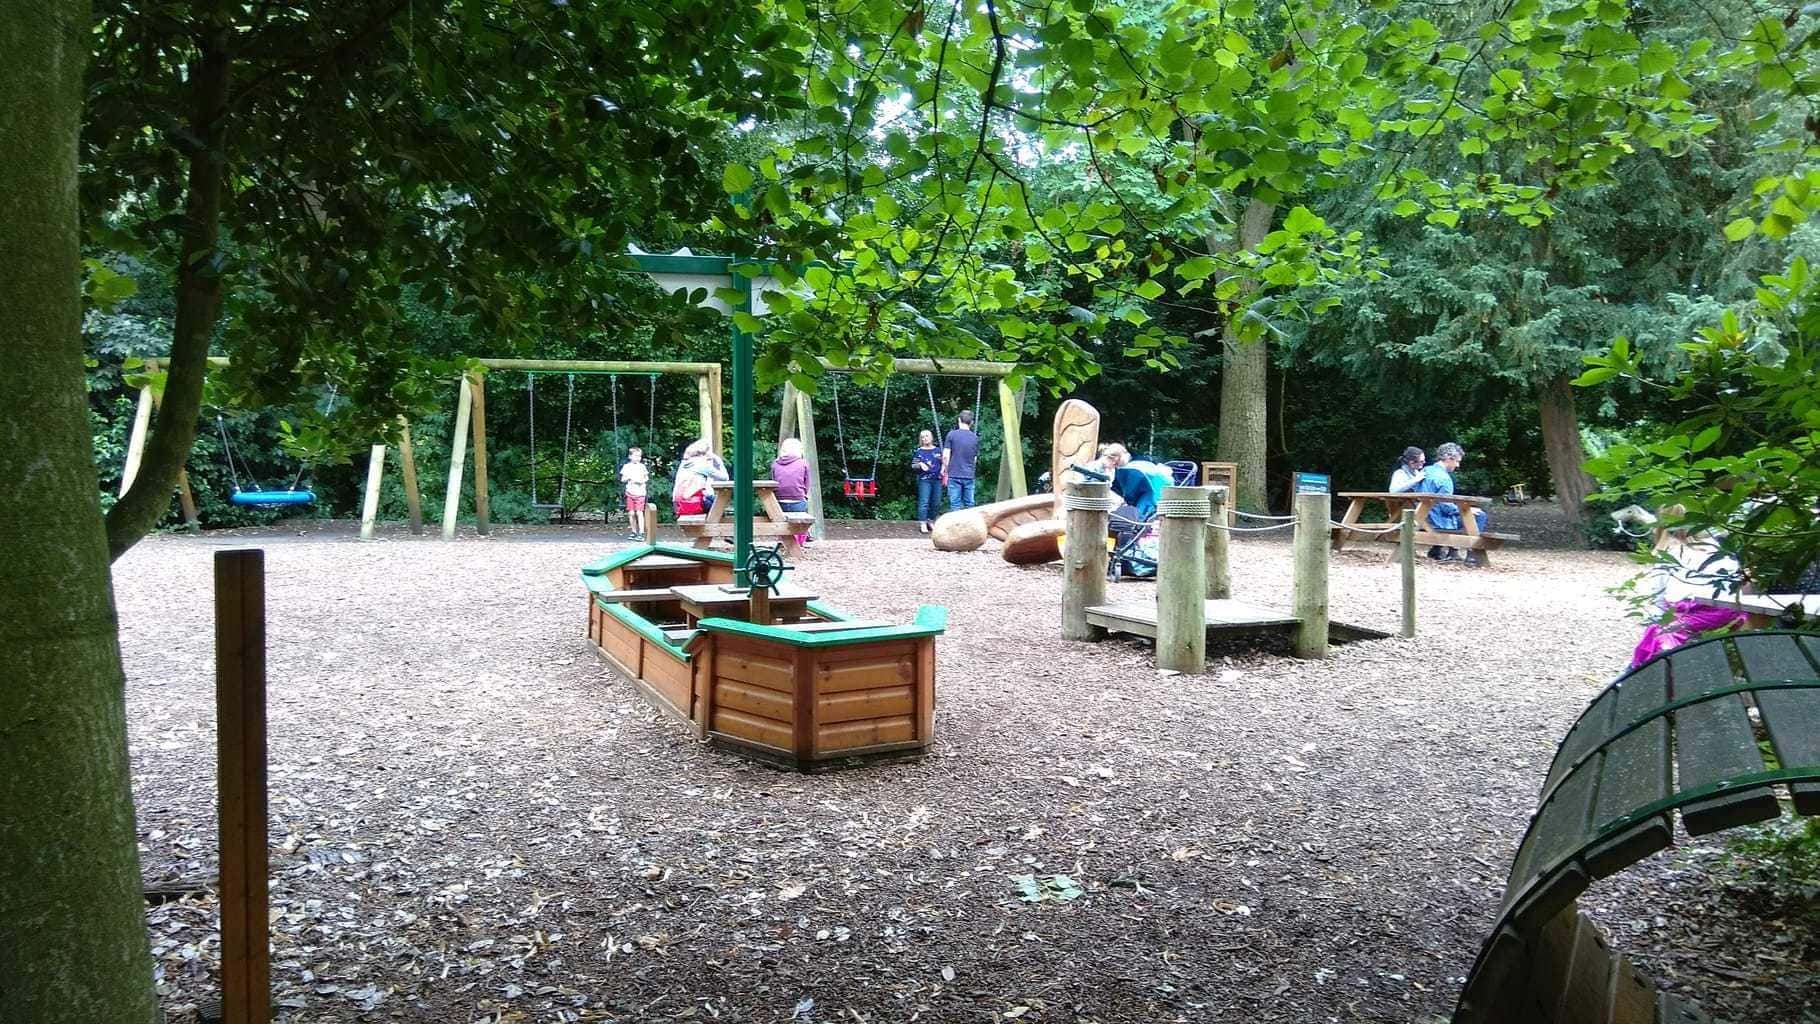 The play area at Beningbrough Hall, featured in my guide of National Trust days out with children in Yorkshire.